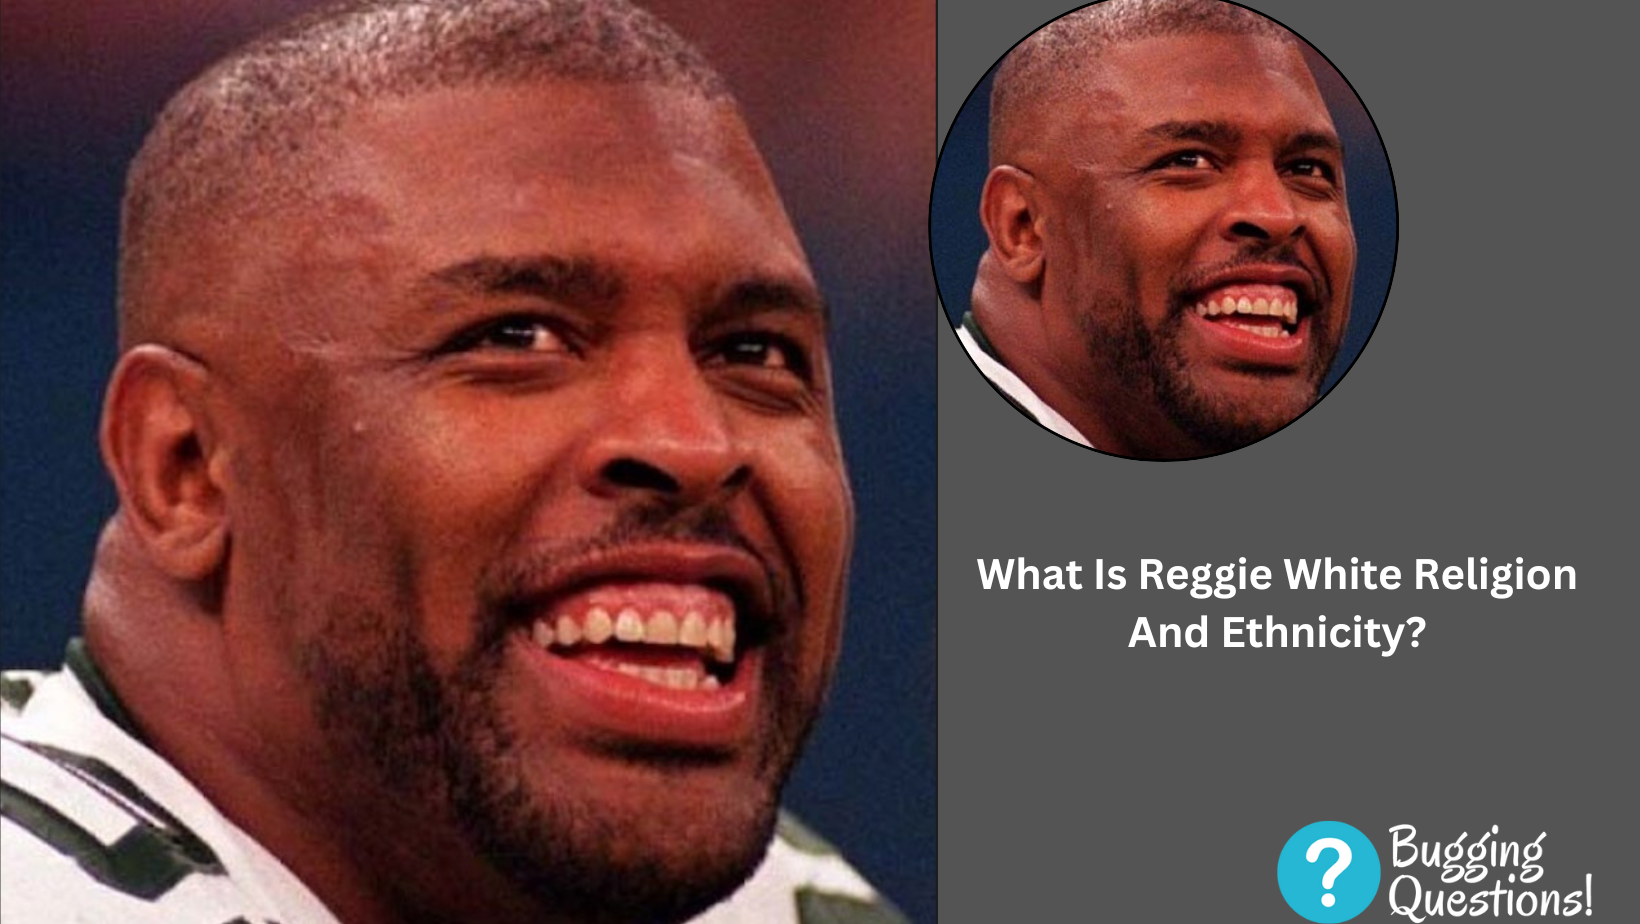 What Is Reggie White Religion And Ethnicity?